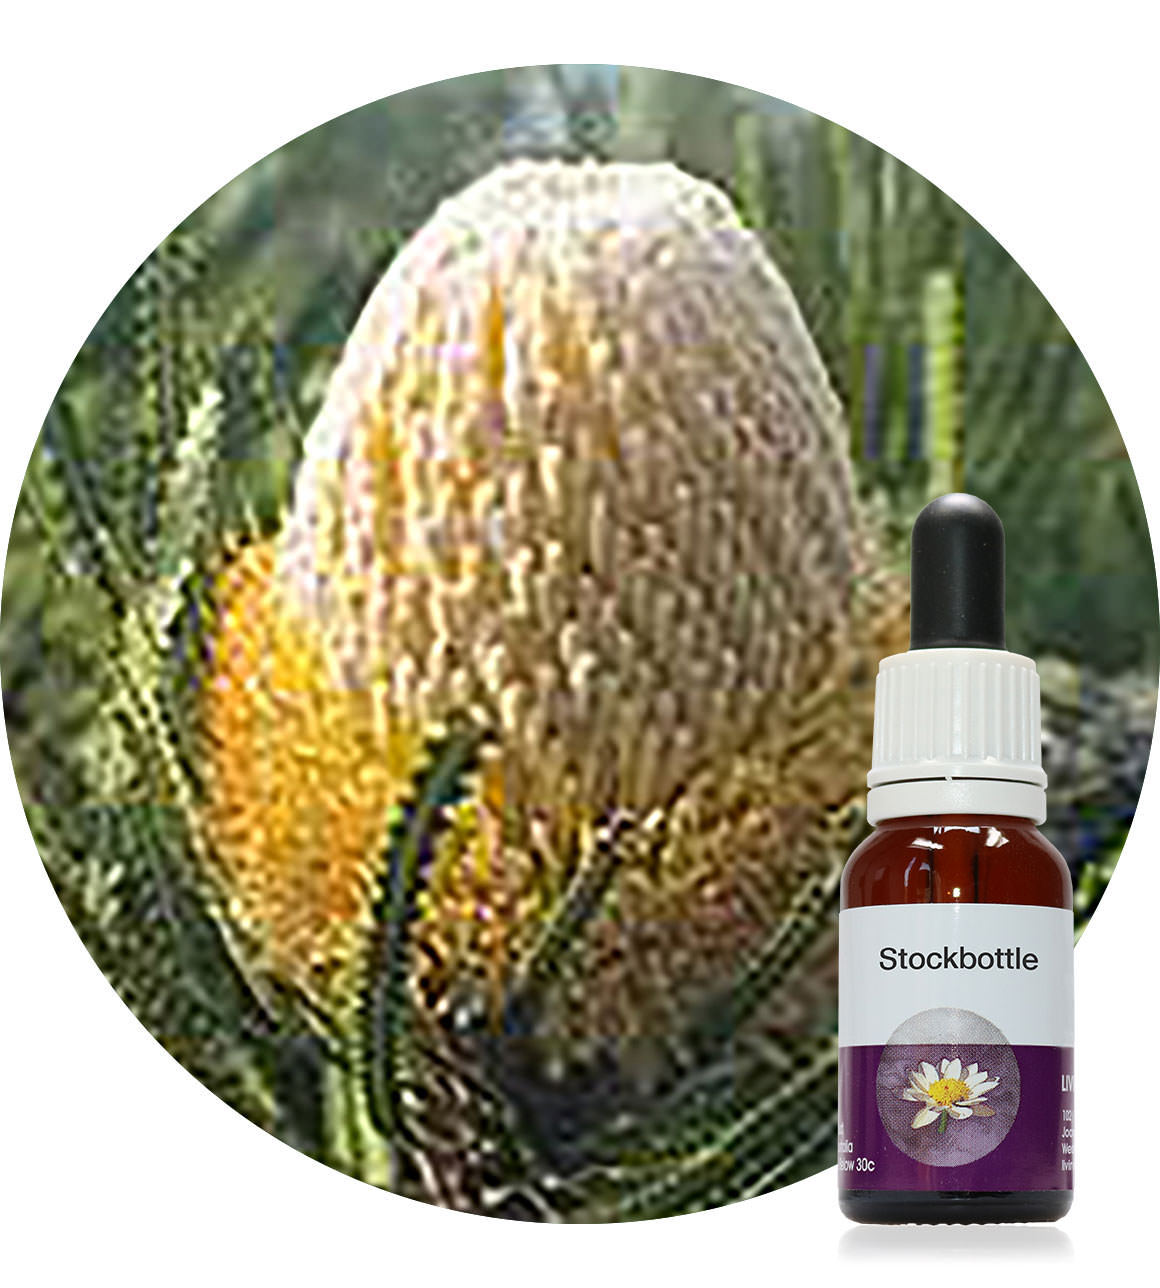 82. Woolly Banksia